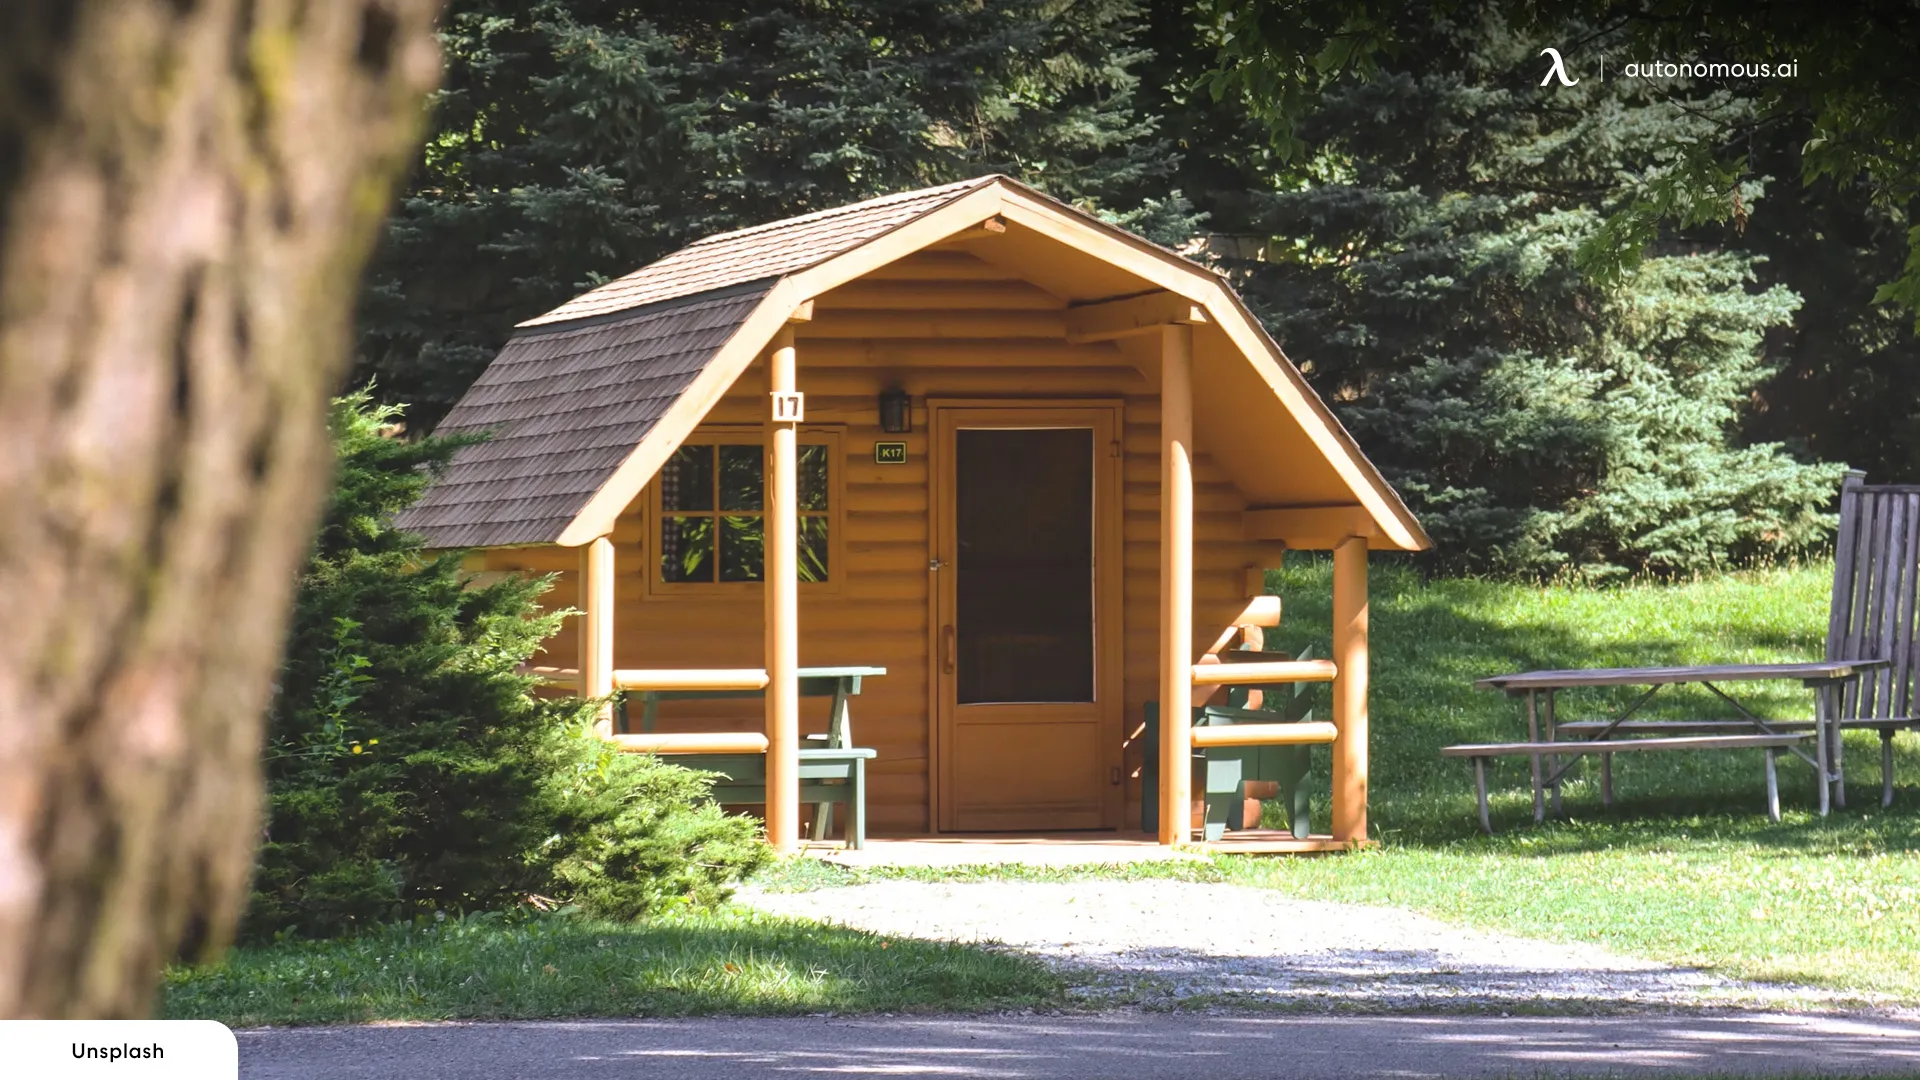 What is the typical size of a tiny home?